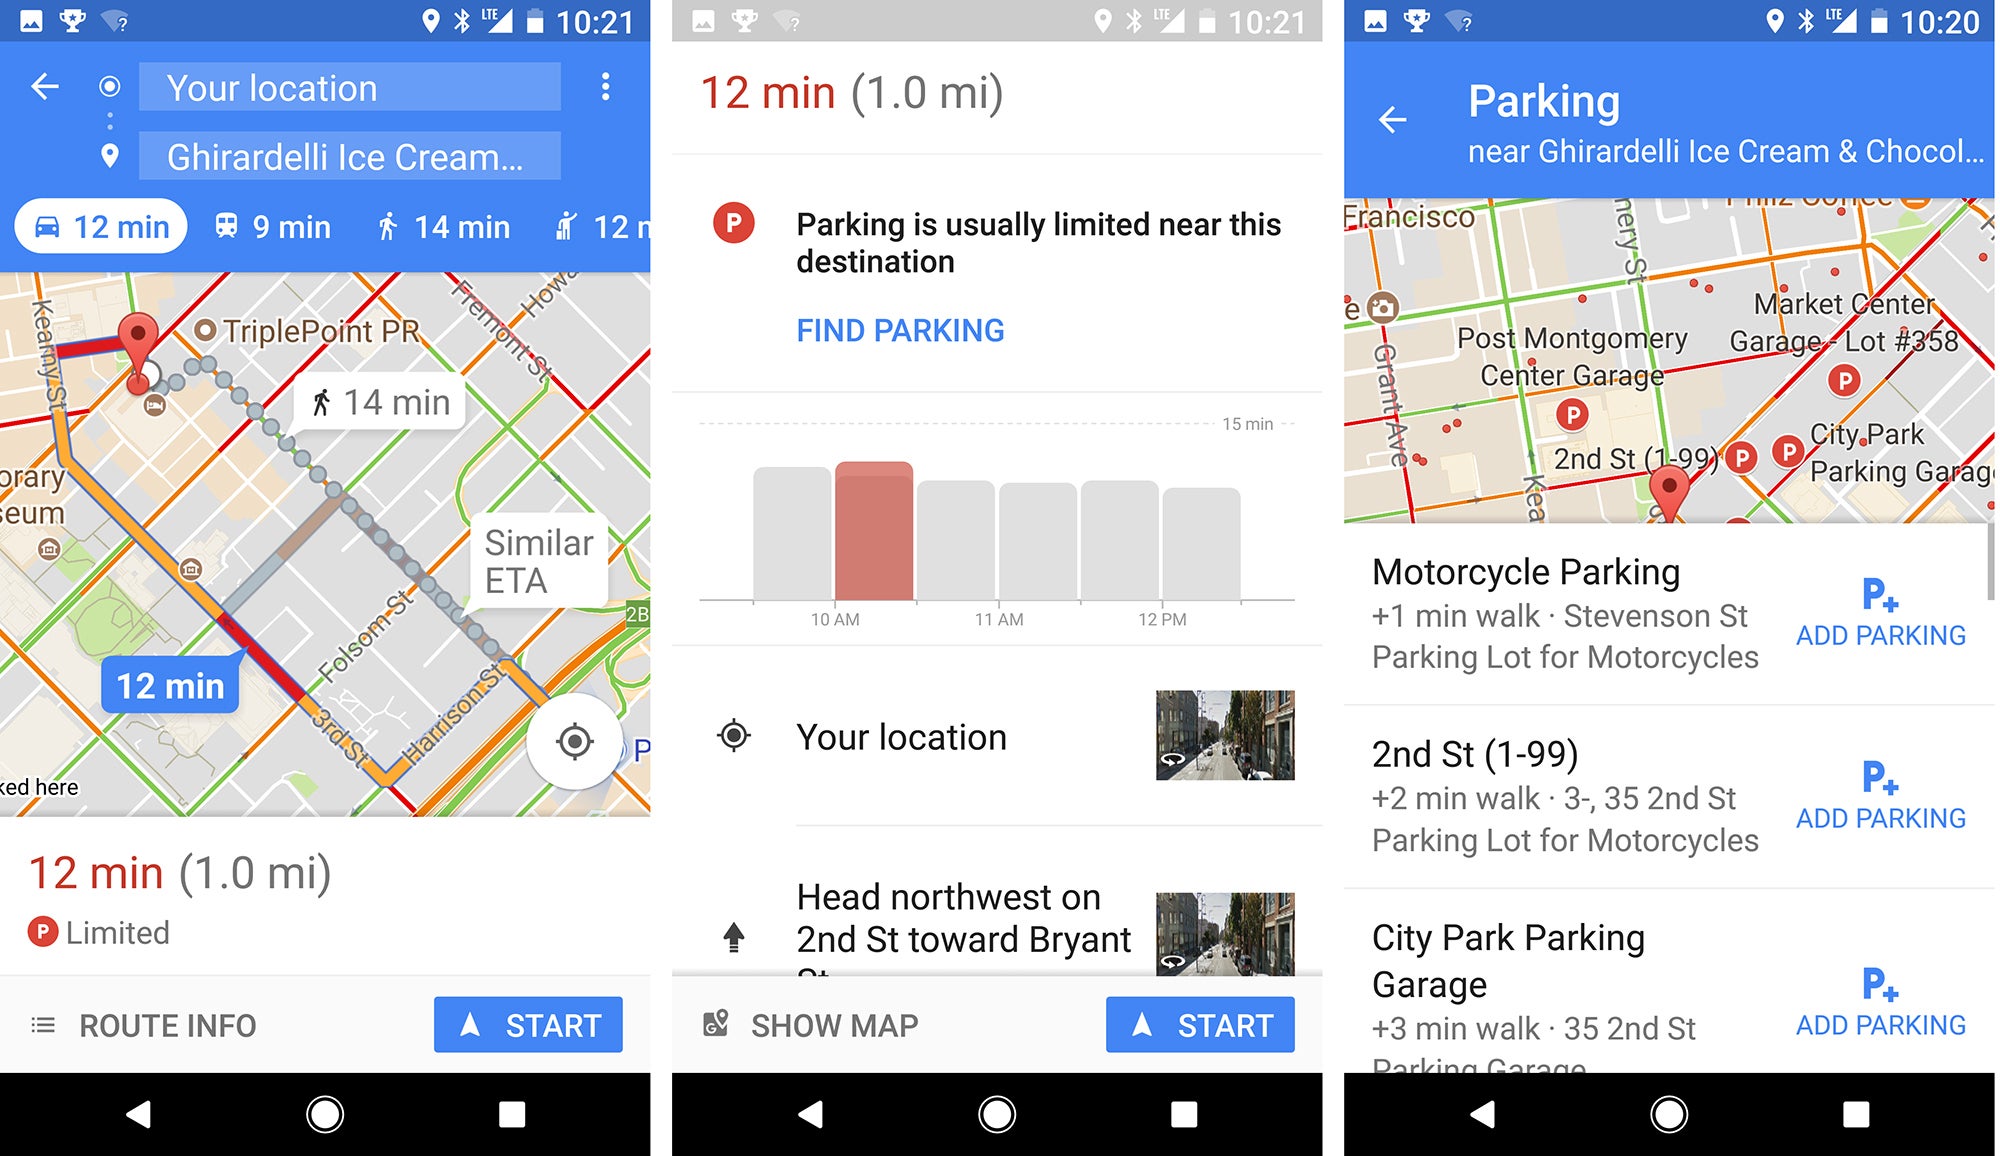 Google Maps: Find Parking and other features you need to start using